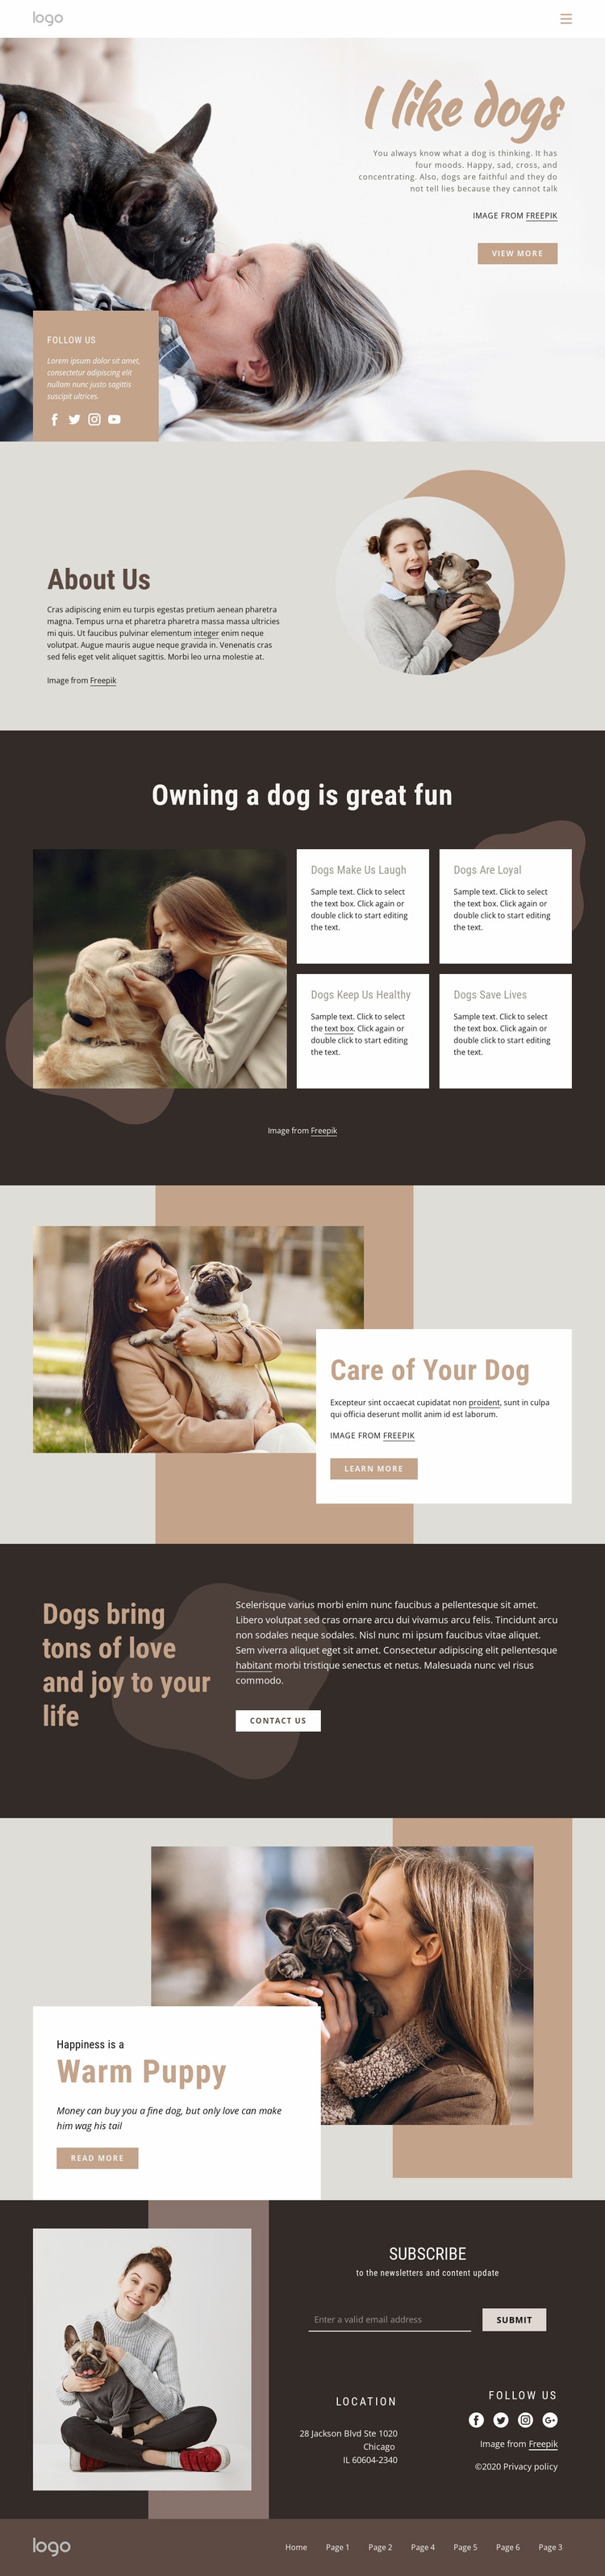 All about dogs Website Template